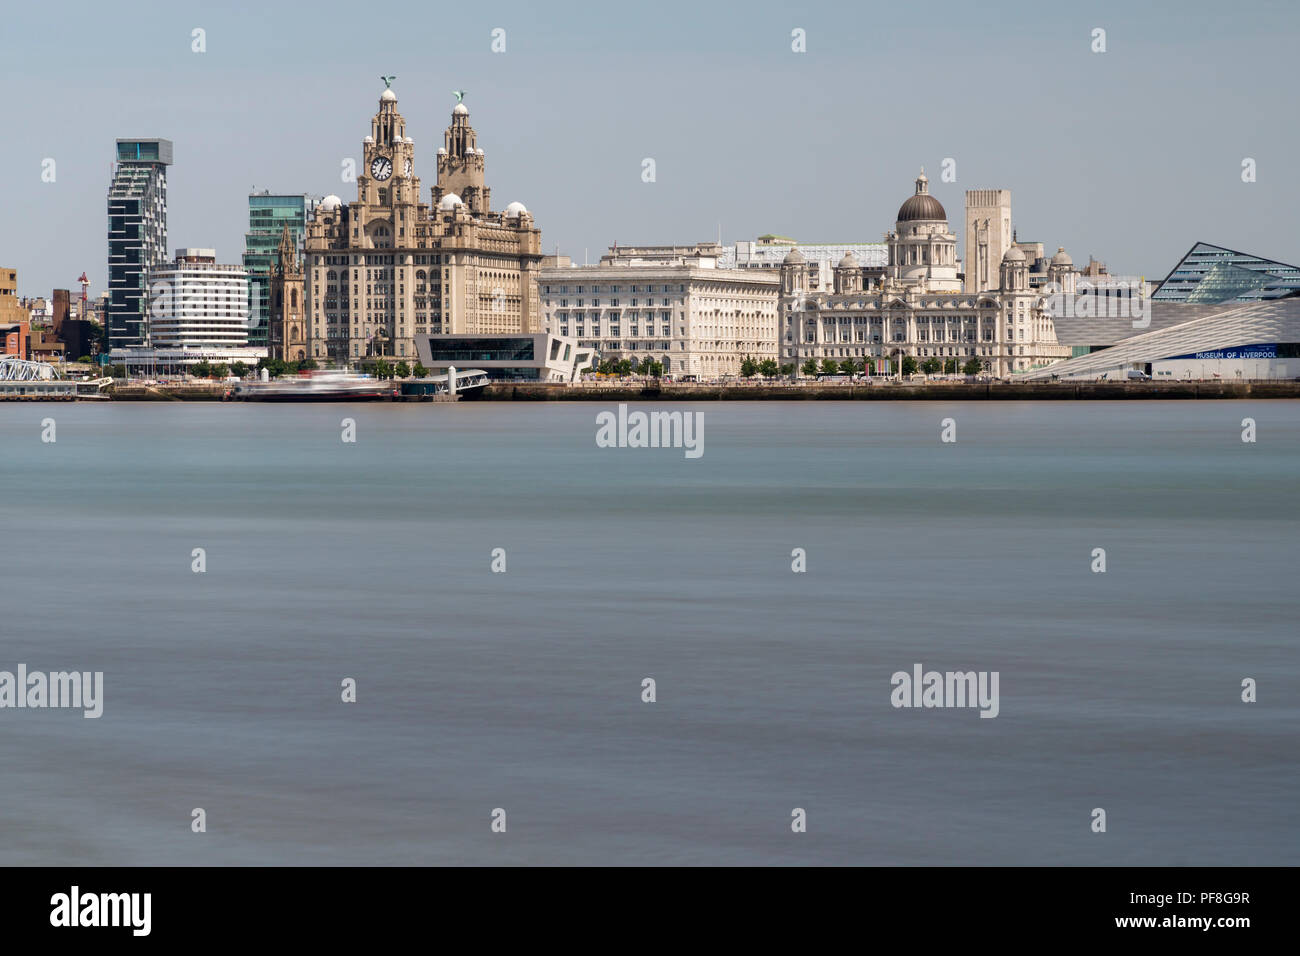 Long exposure image image of the River Mersey and Liverpool, shot from Birkenhead, Merseyside, England Stock Photo